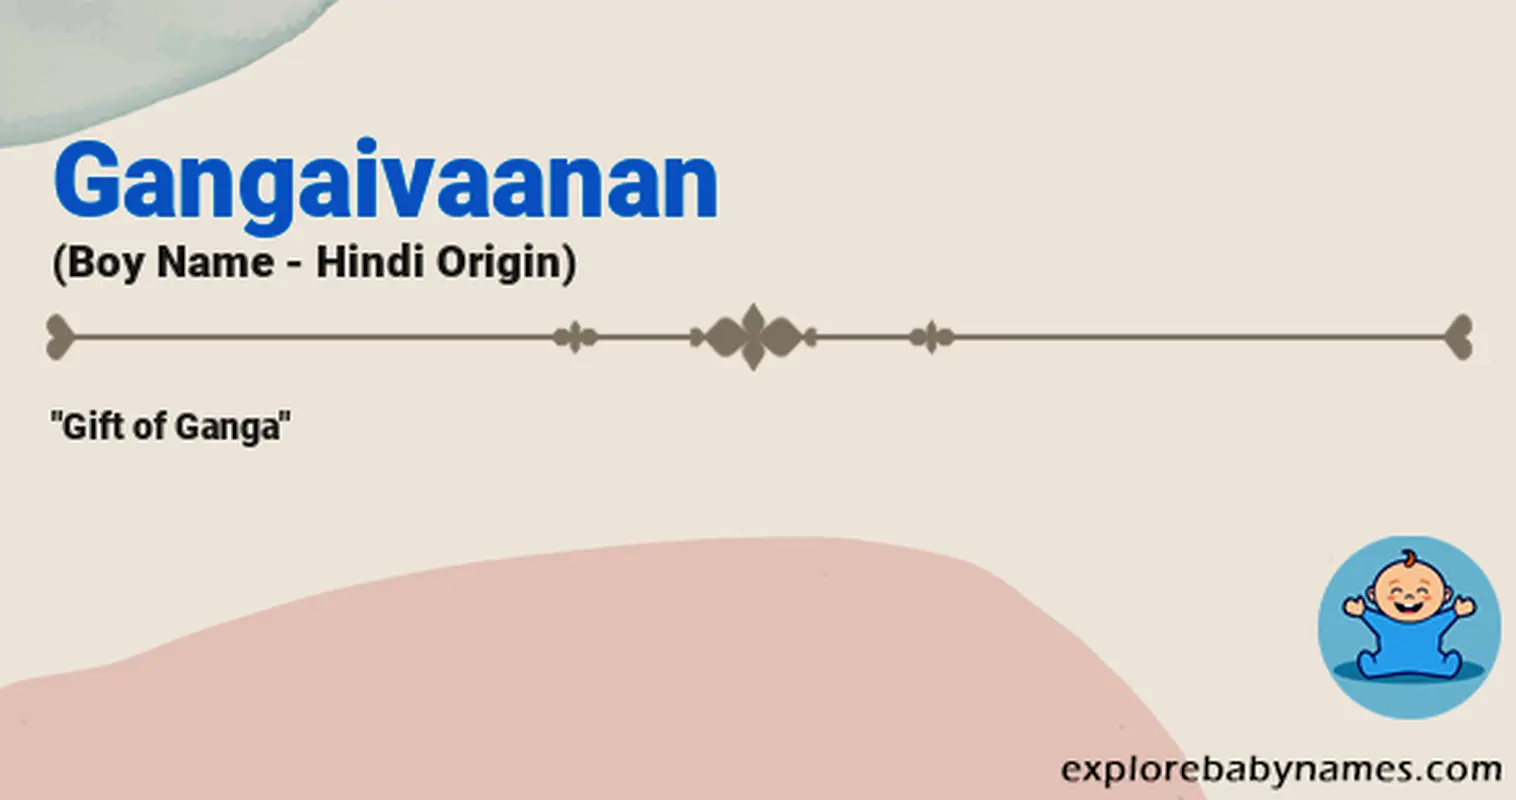 Meaning of Gangaivaanan